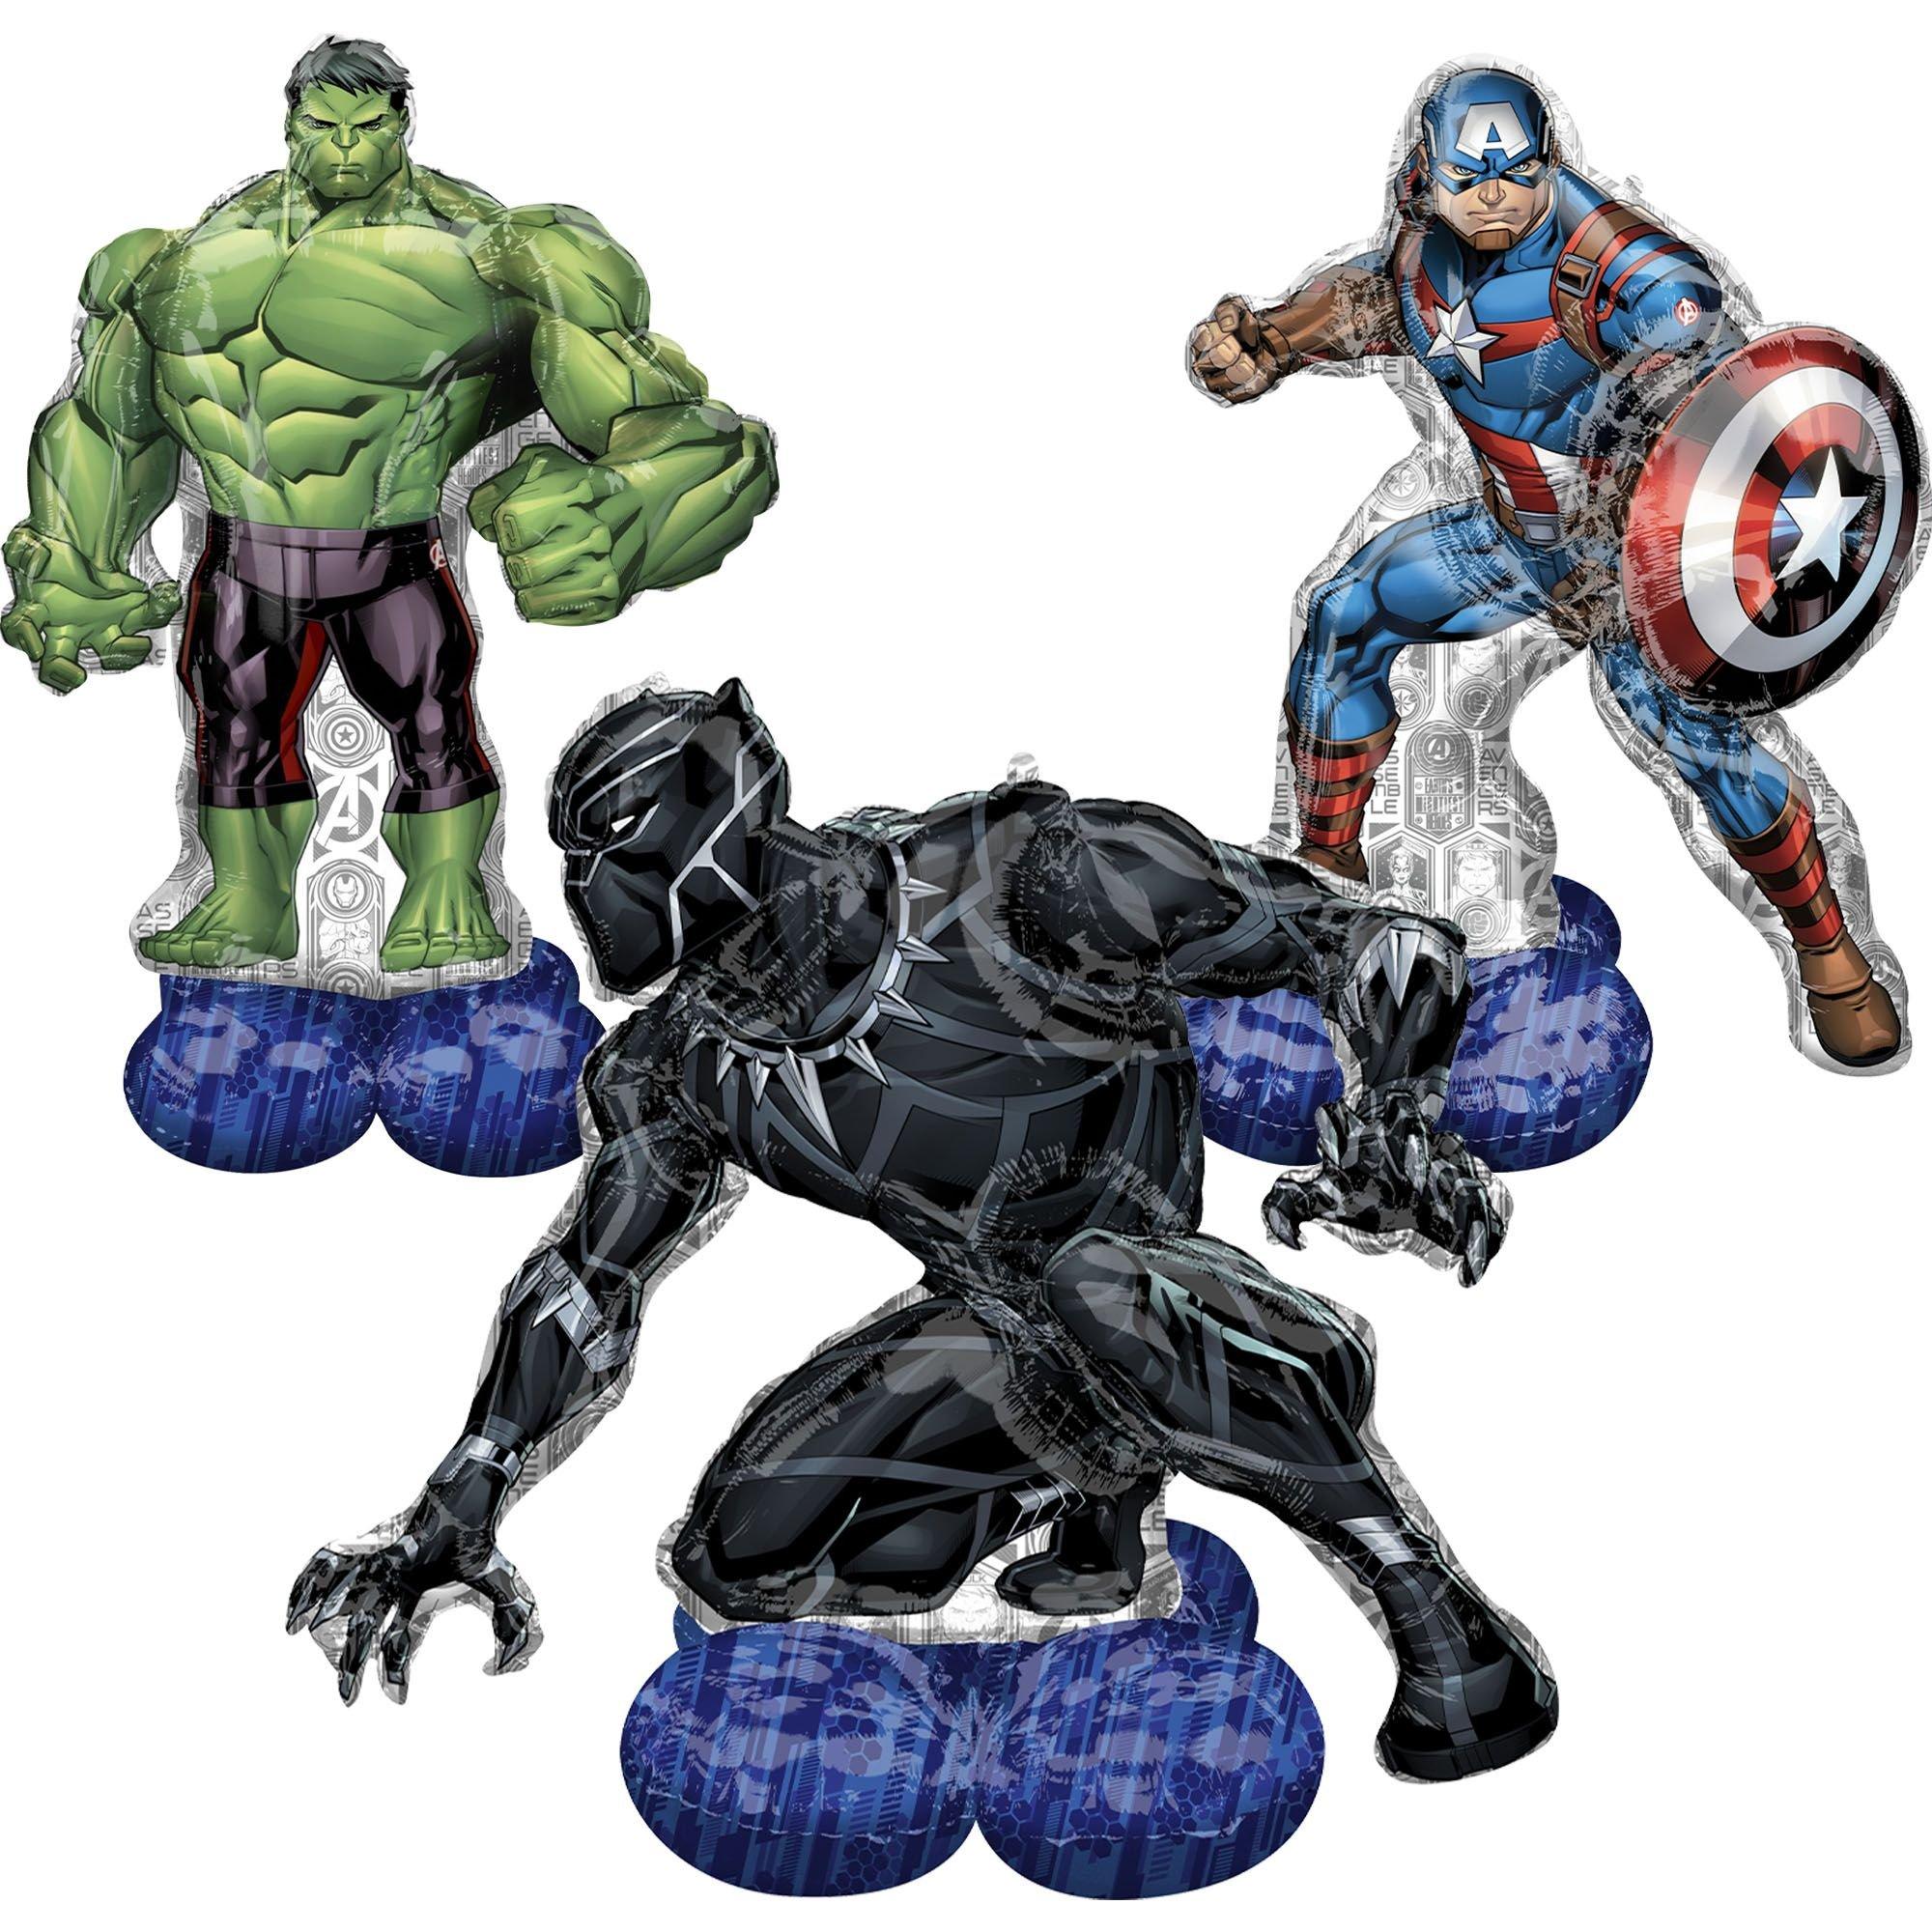 Amscan Airloonz Marvel's Avengers Foil Balloon Set, 3PC Birthday Party